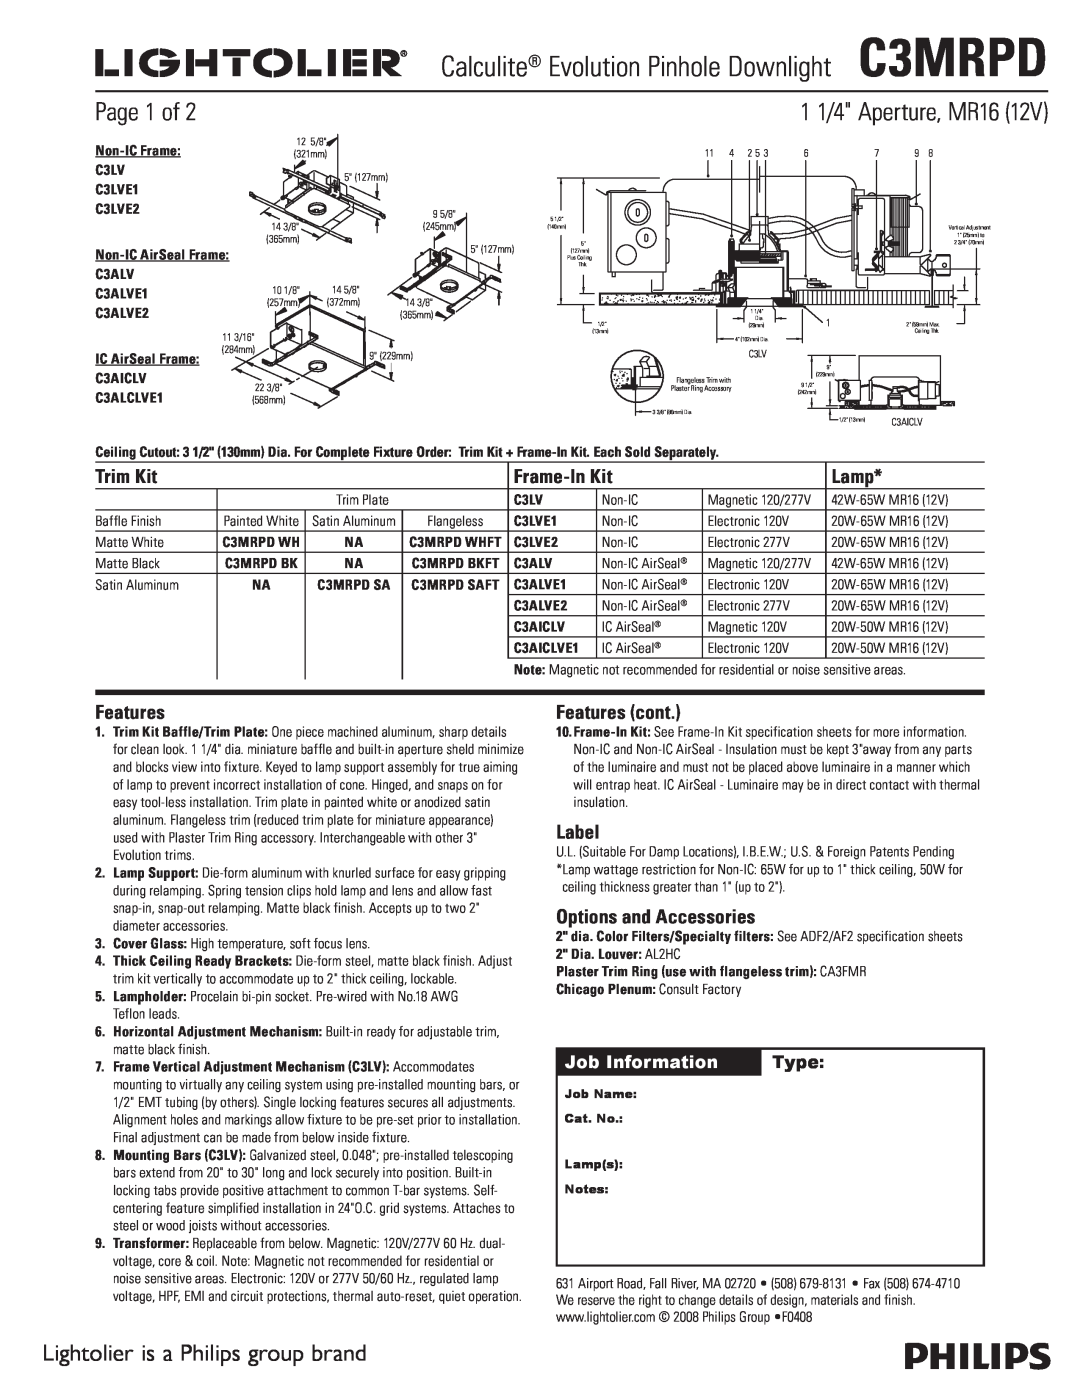 Lightolier C3MRPD specifications Page 1 of, 1 1/4 Aperture, MR16, Lightolier is a Philips group brand, Job Information 